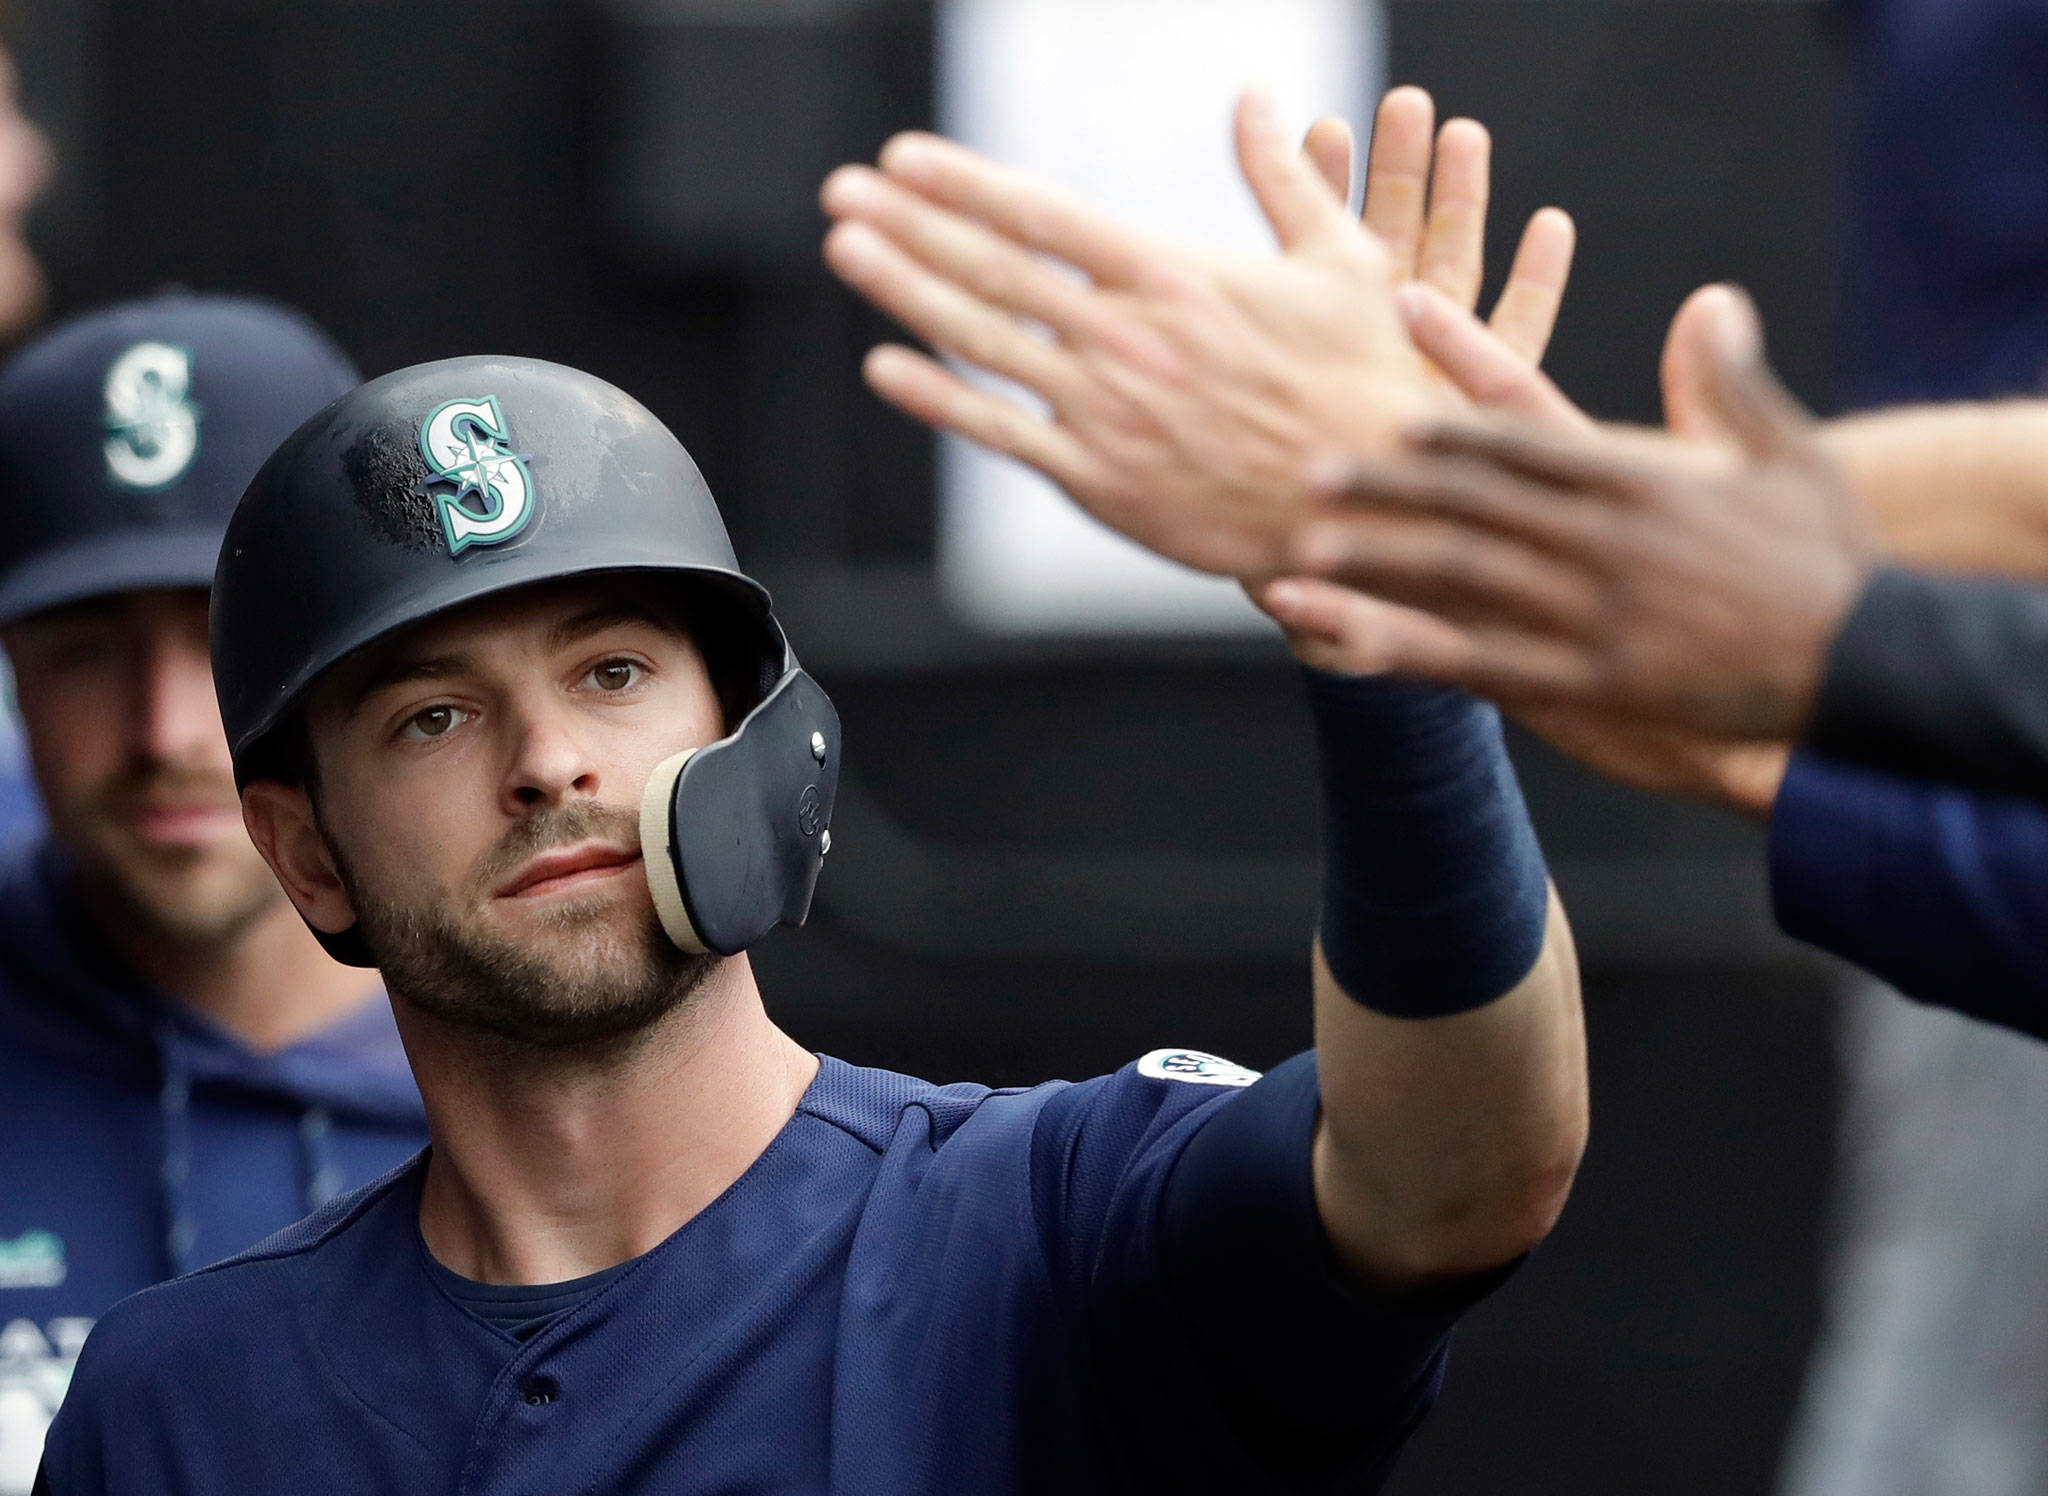 The Mariners’ Mitch Haniger will be out indefinitely after undergoing surgery on his back Thursday, the latest in a string of setbacks for the former All-Star outfielder. (AP Photo/Nam Y. Huh)